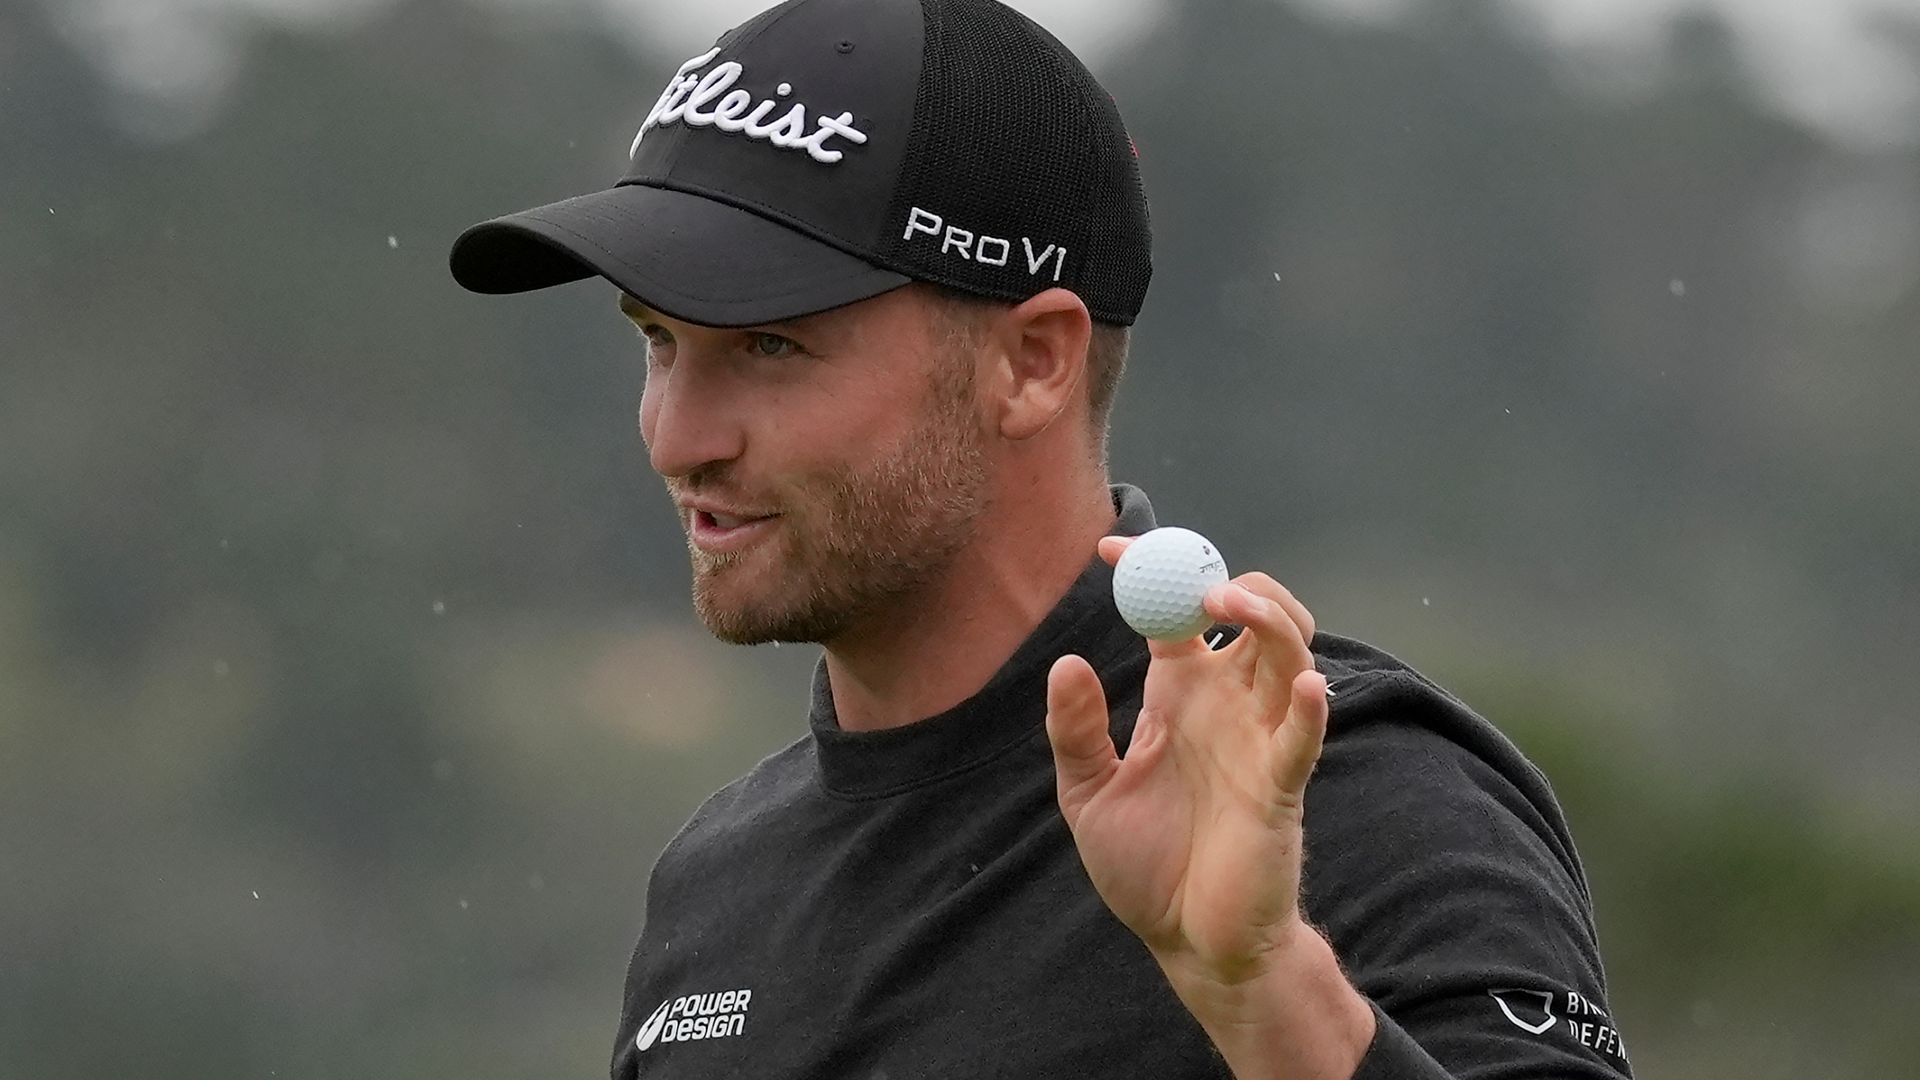 Clark shoots Pebble Beach course-record 60 to take lead